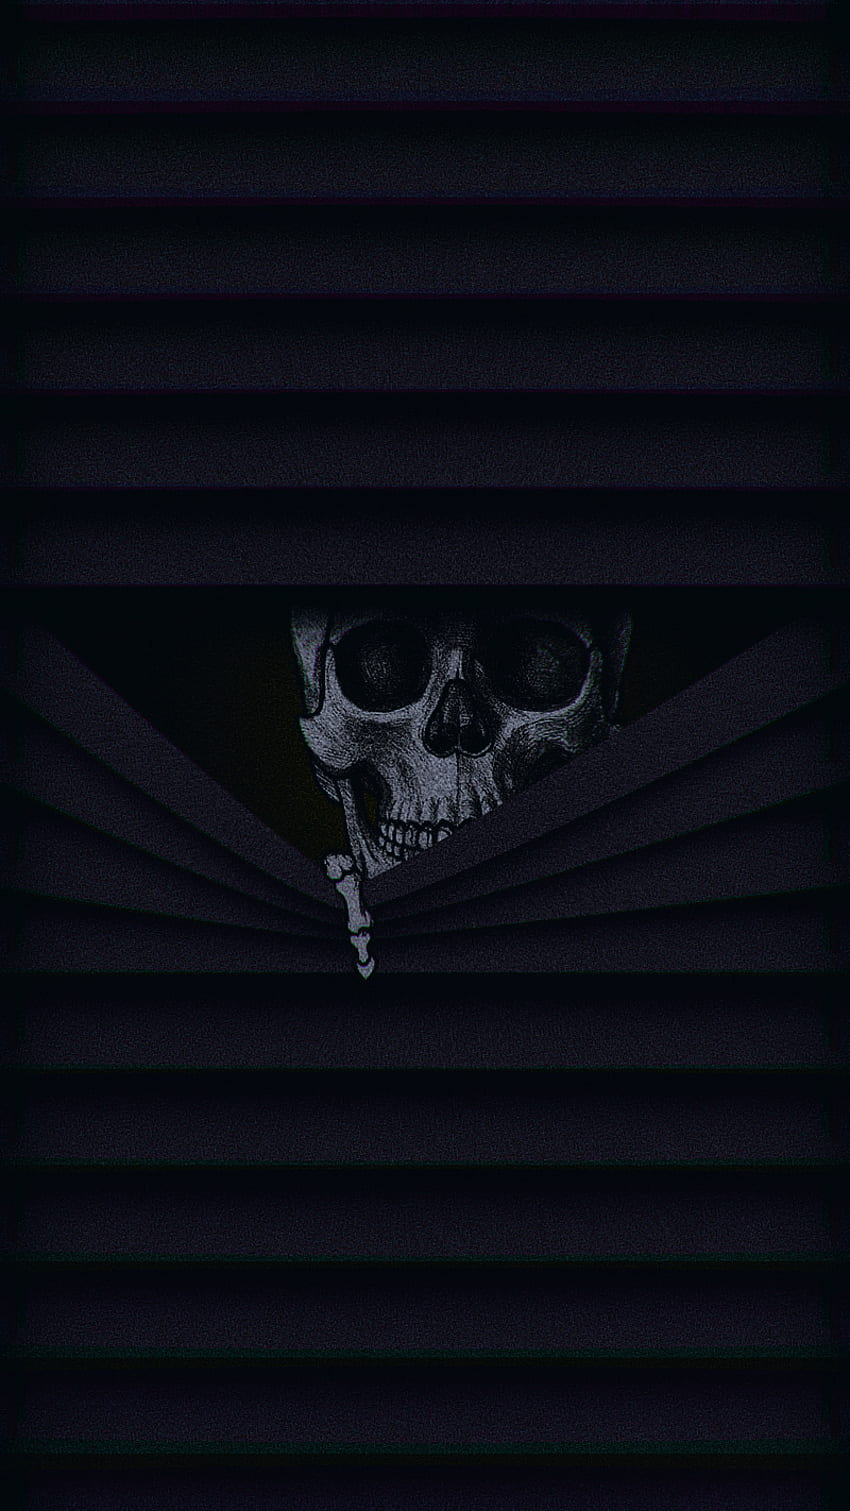 Wallpaper I made that uses just the right shade of grey to hide the dock  background  riphonewallpapers